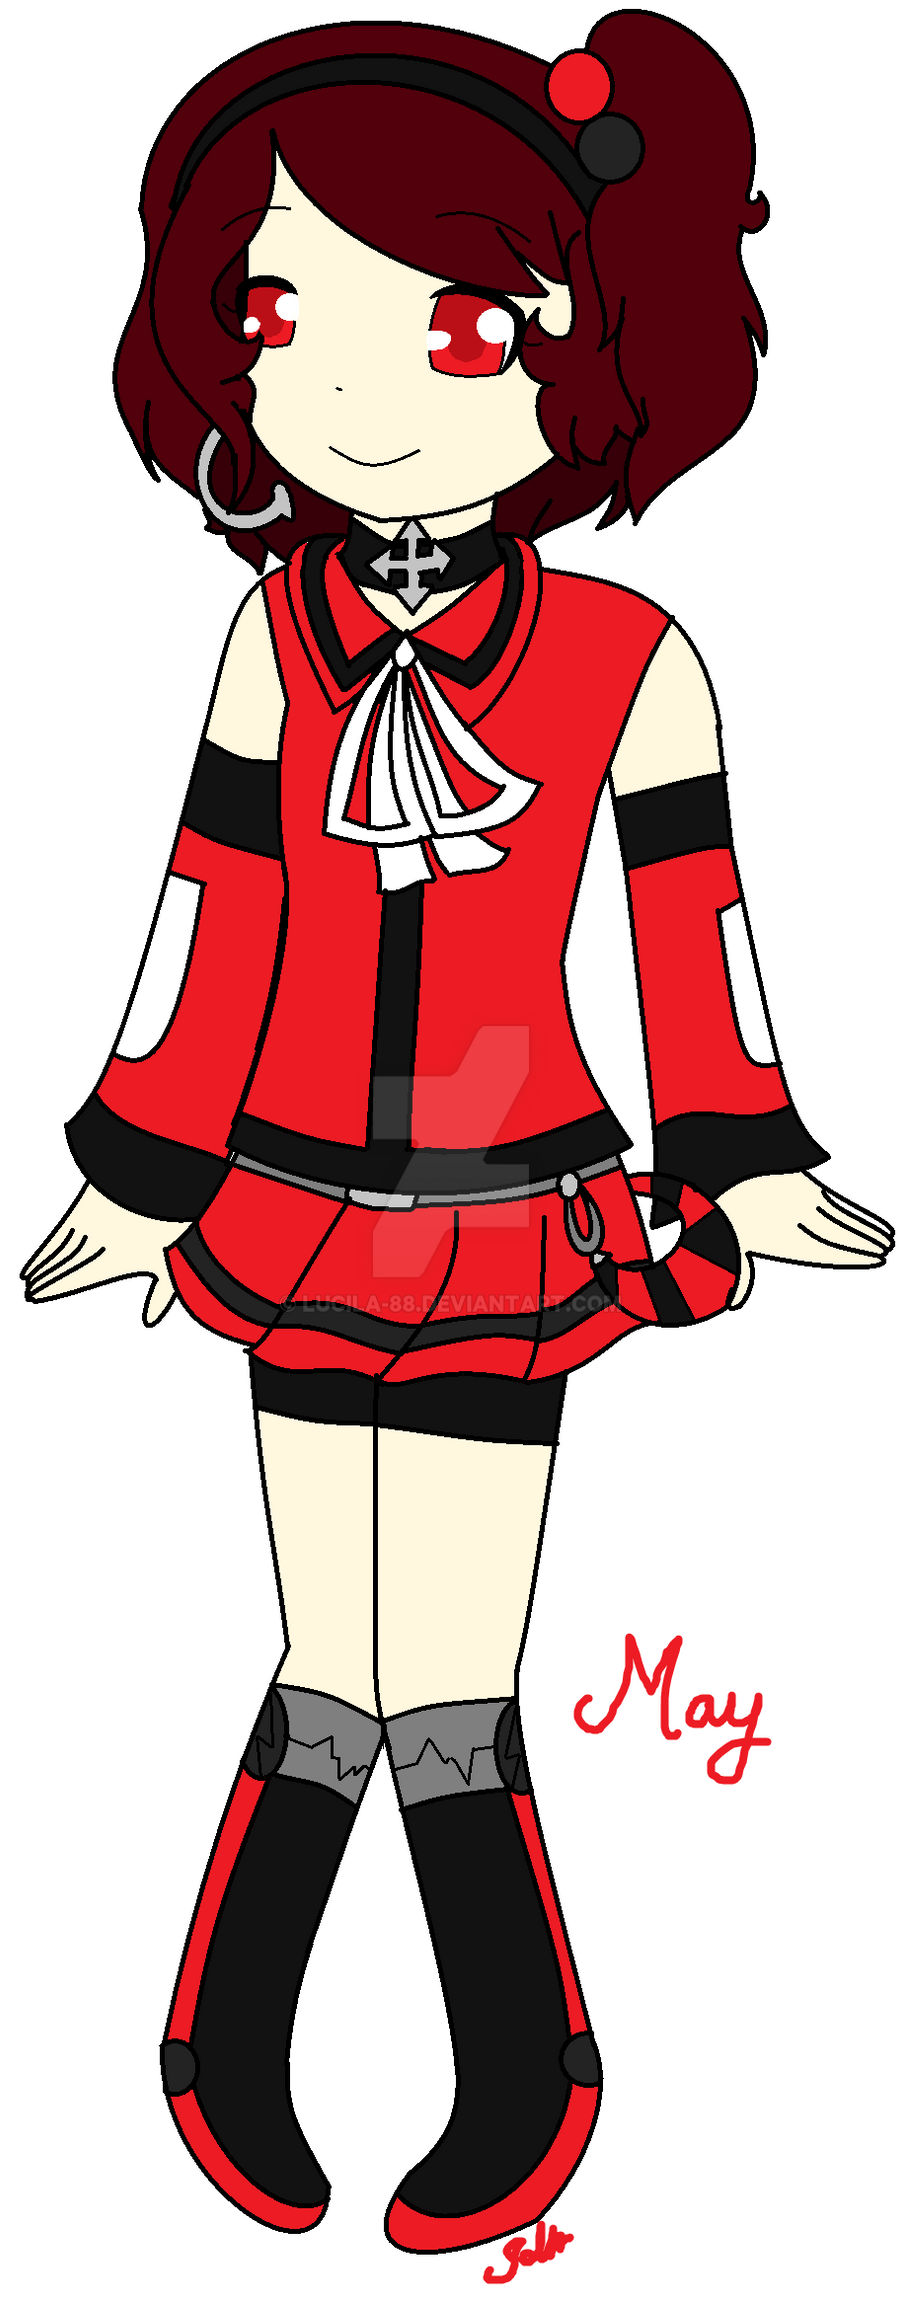 vocaloid oc: May